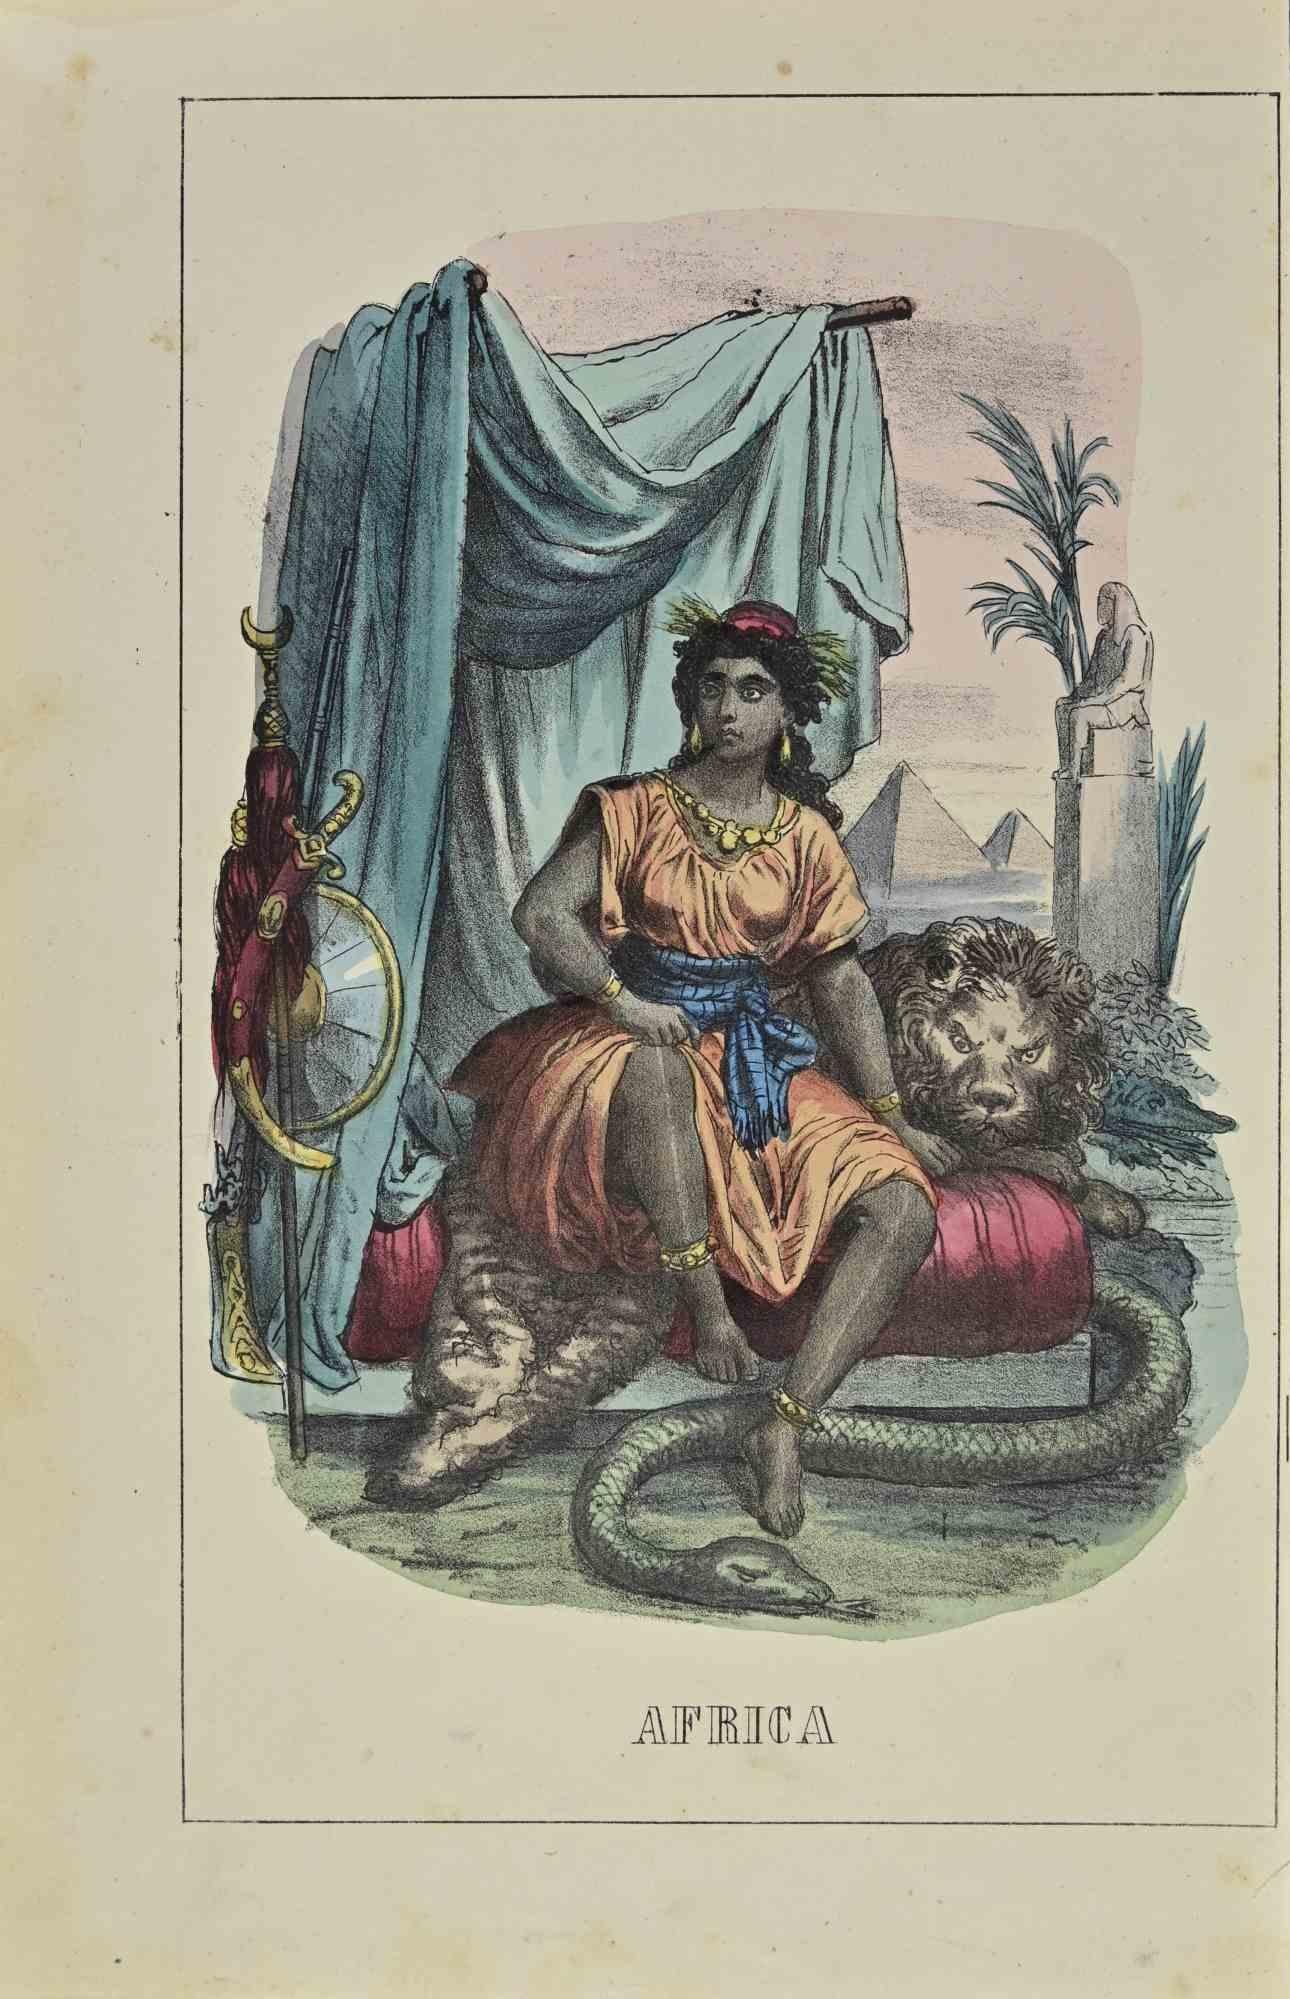 Ancient African Customs is a lithograph made by Auguste Wahlen in 1844.

Hand colored.

Good condition.

At the center of the artwork is the original title "Africa".

The work is part of Suite Moeurs, usages et costumes de tous les peuples du monde,